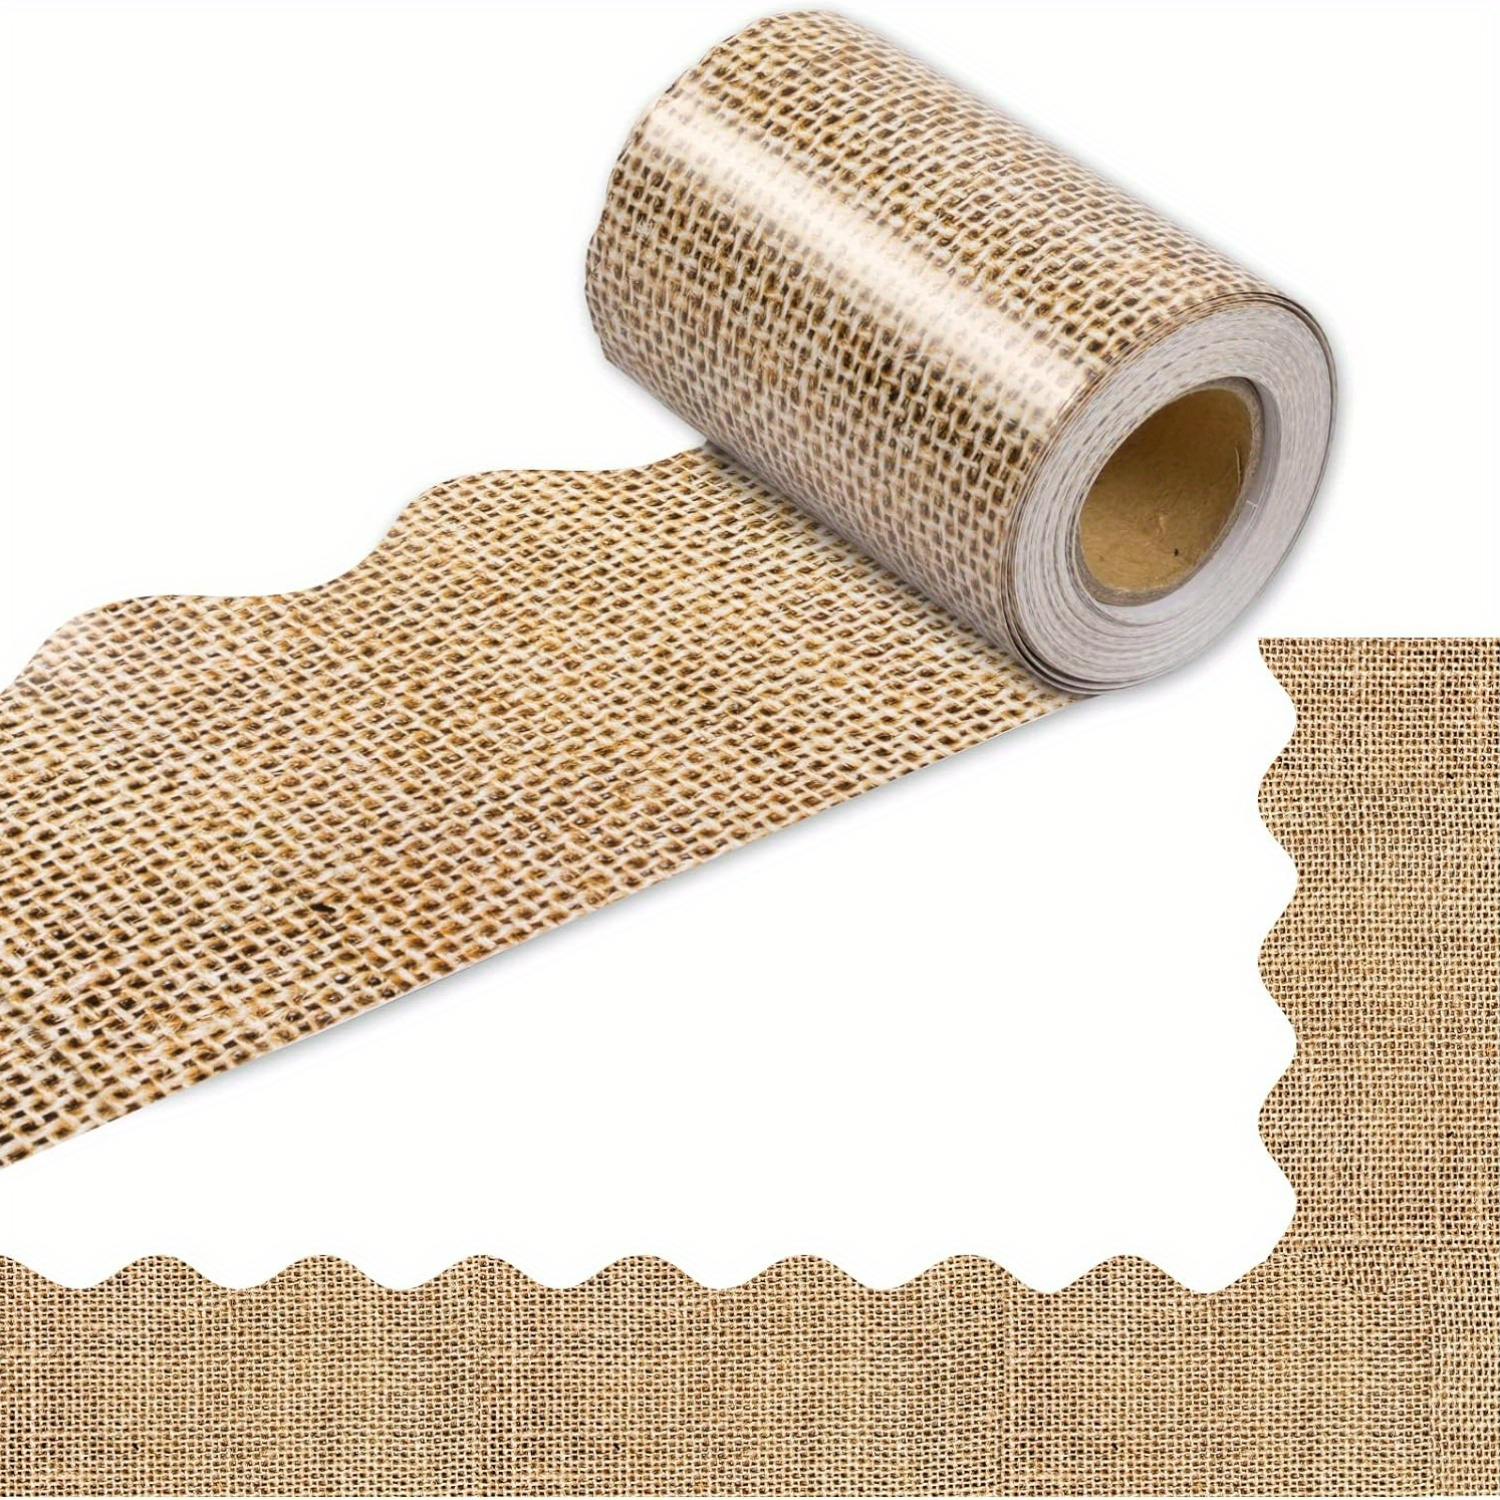 

Burlap Scalloped Border Trim For Bulletin Boards - 72ft Roll, Perfect For Classroom Chalkboards & Office Decor Office Wall Decor For School